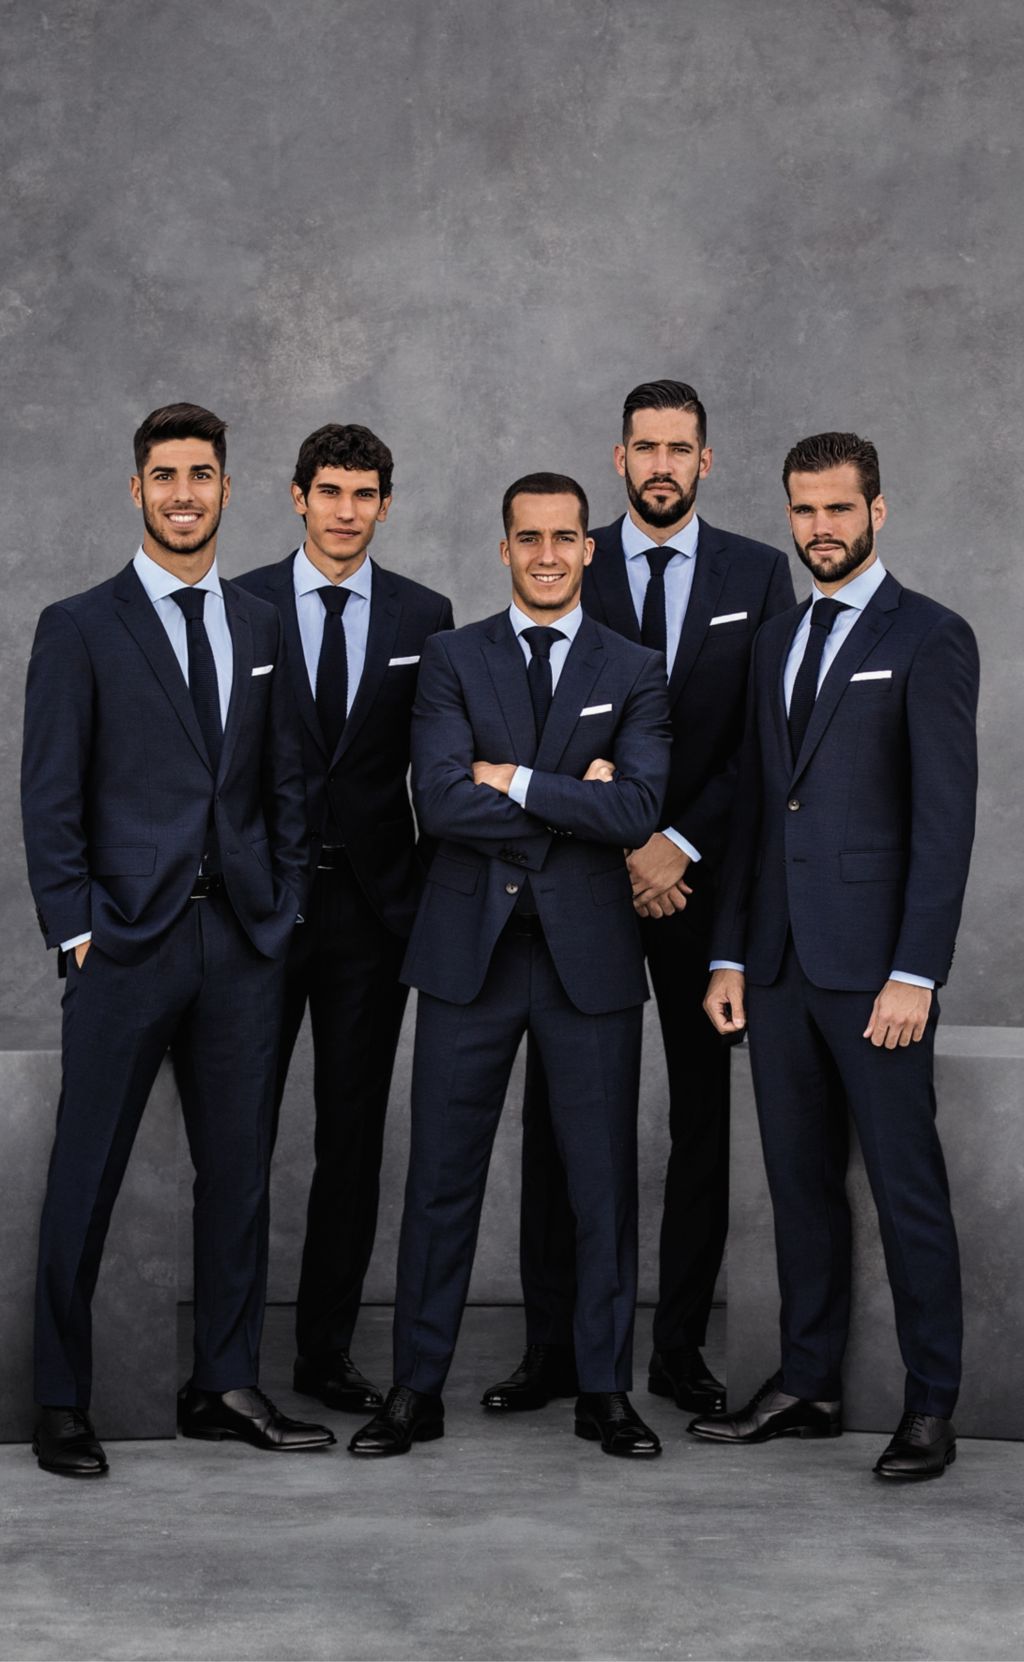 Afsnit ægteskab Perth Blackborough Real Madrid C. F. - Players wearing BOSS | Suits & casual looks